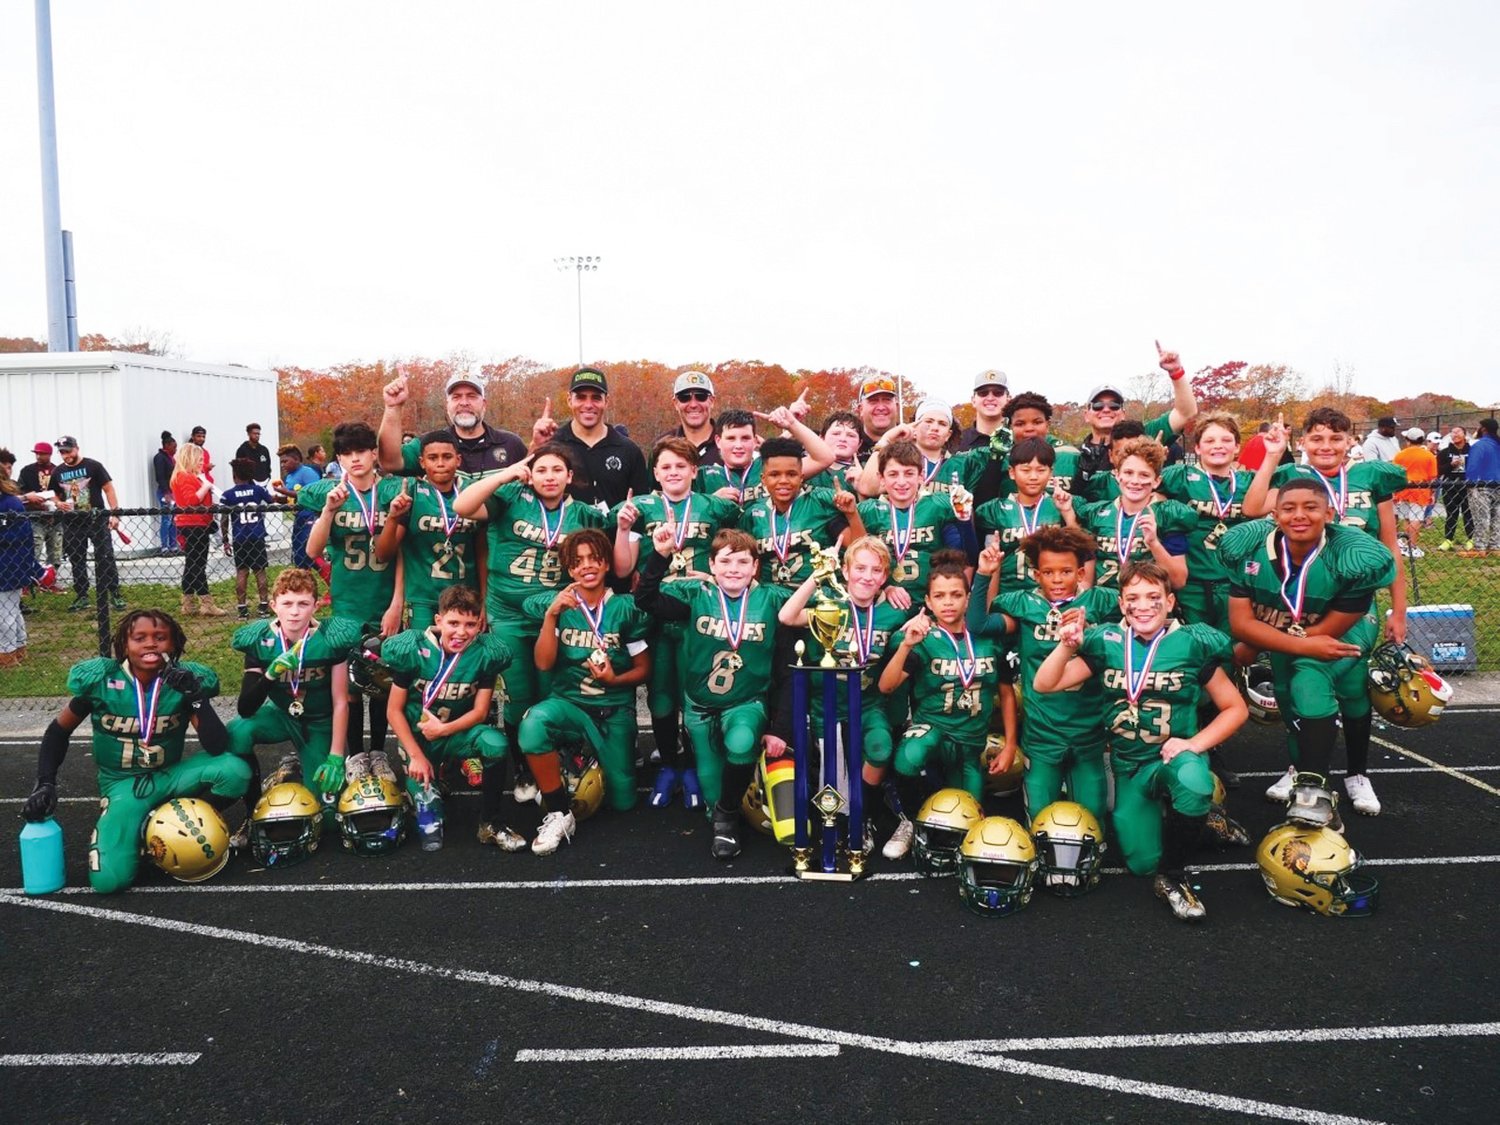 STATE CHAMPS: The CLCF 11-U team after winning the state championship. (Submitted photo)